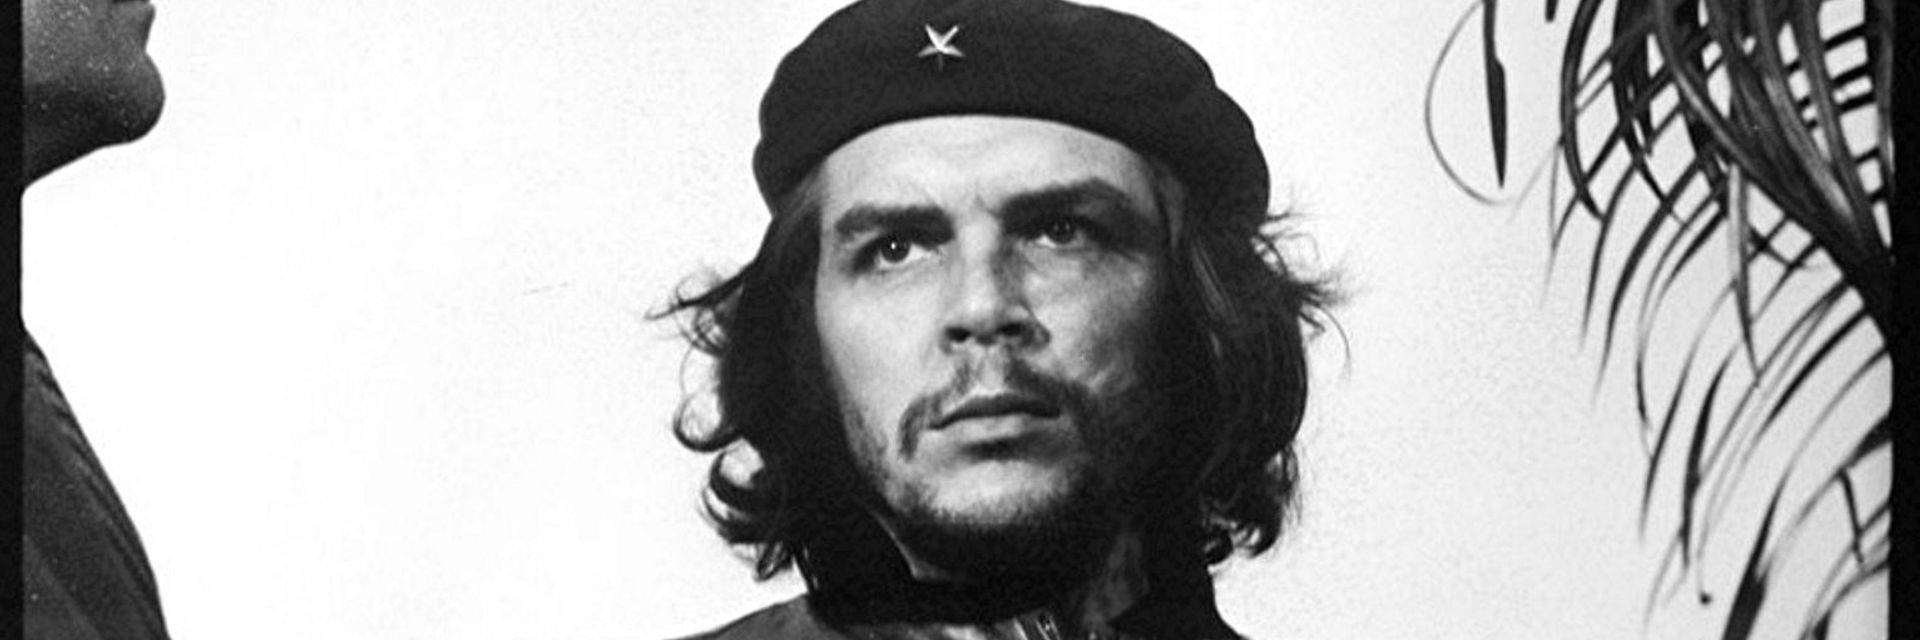 Che Guevara&#58; The Photo that Symbolized Revolution in Cuba and the World